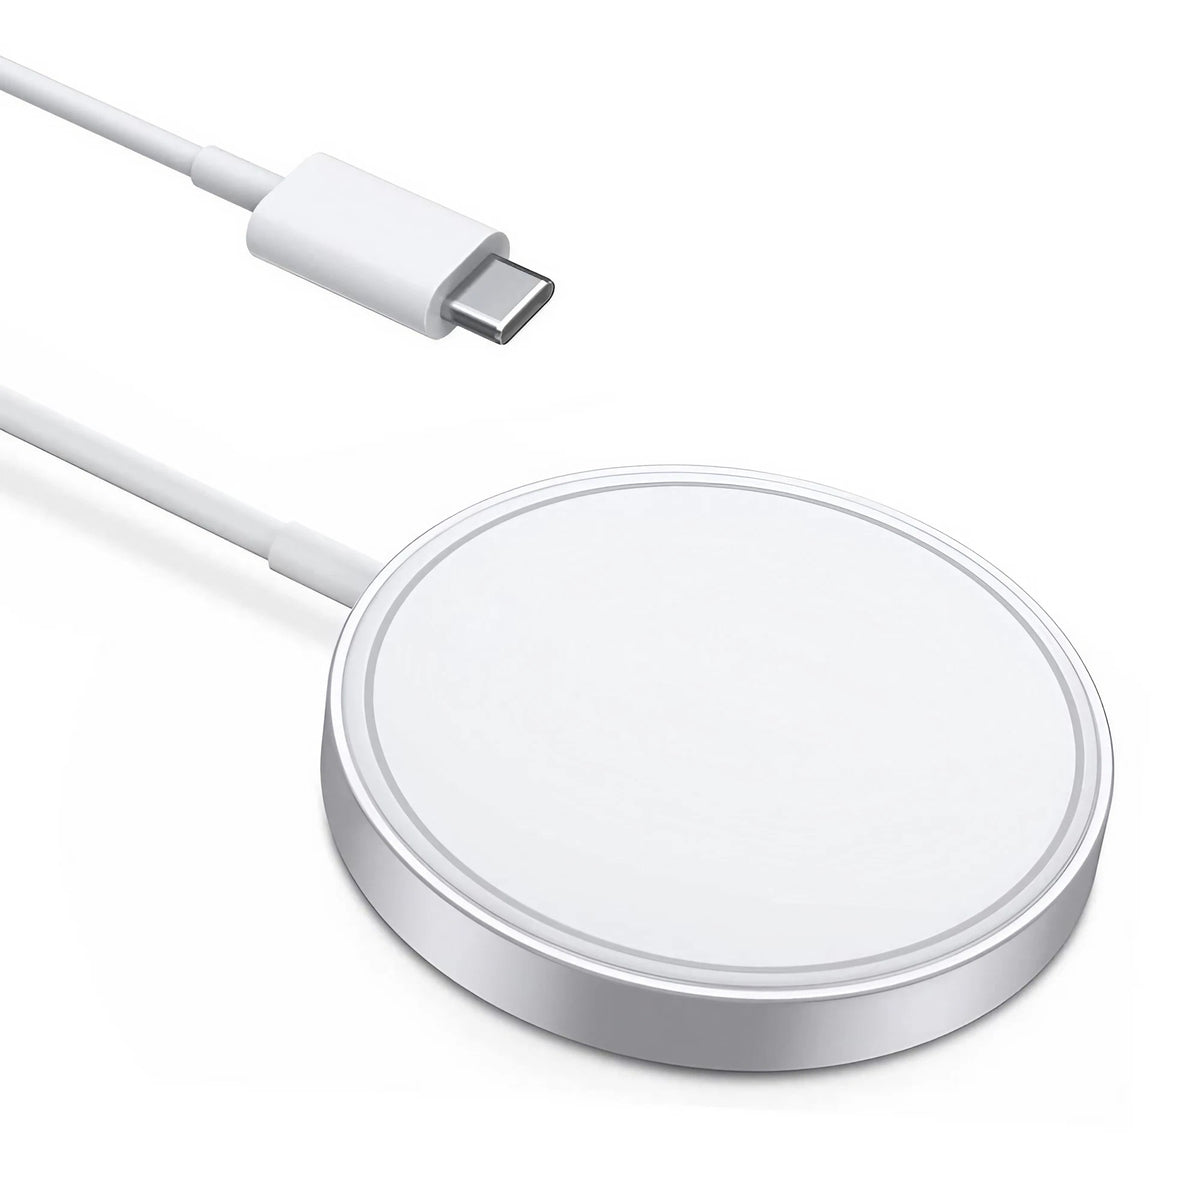 Magsafe Wireless Charger Compatible For iPhones iPhone 13, iPhone 12/12 Mini & 12 pro